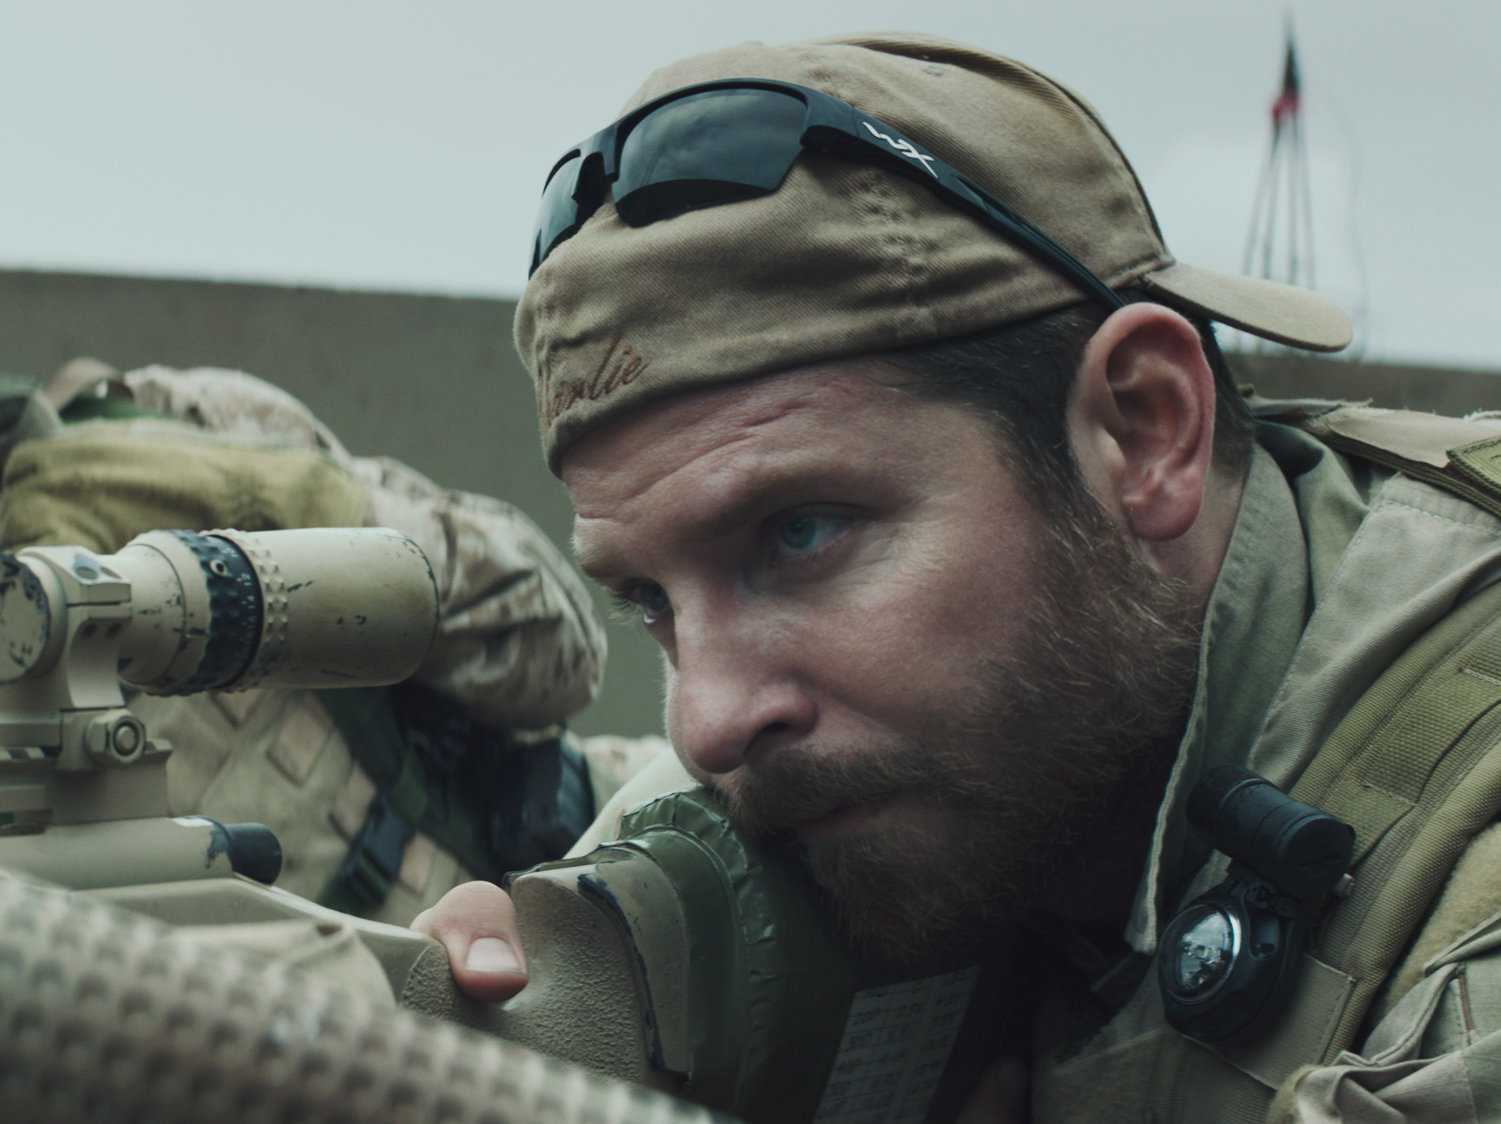 Bradley Cooper as Chris Kyle in American Sniper (Source: The New York Times)